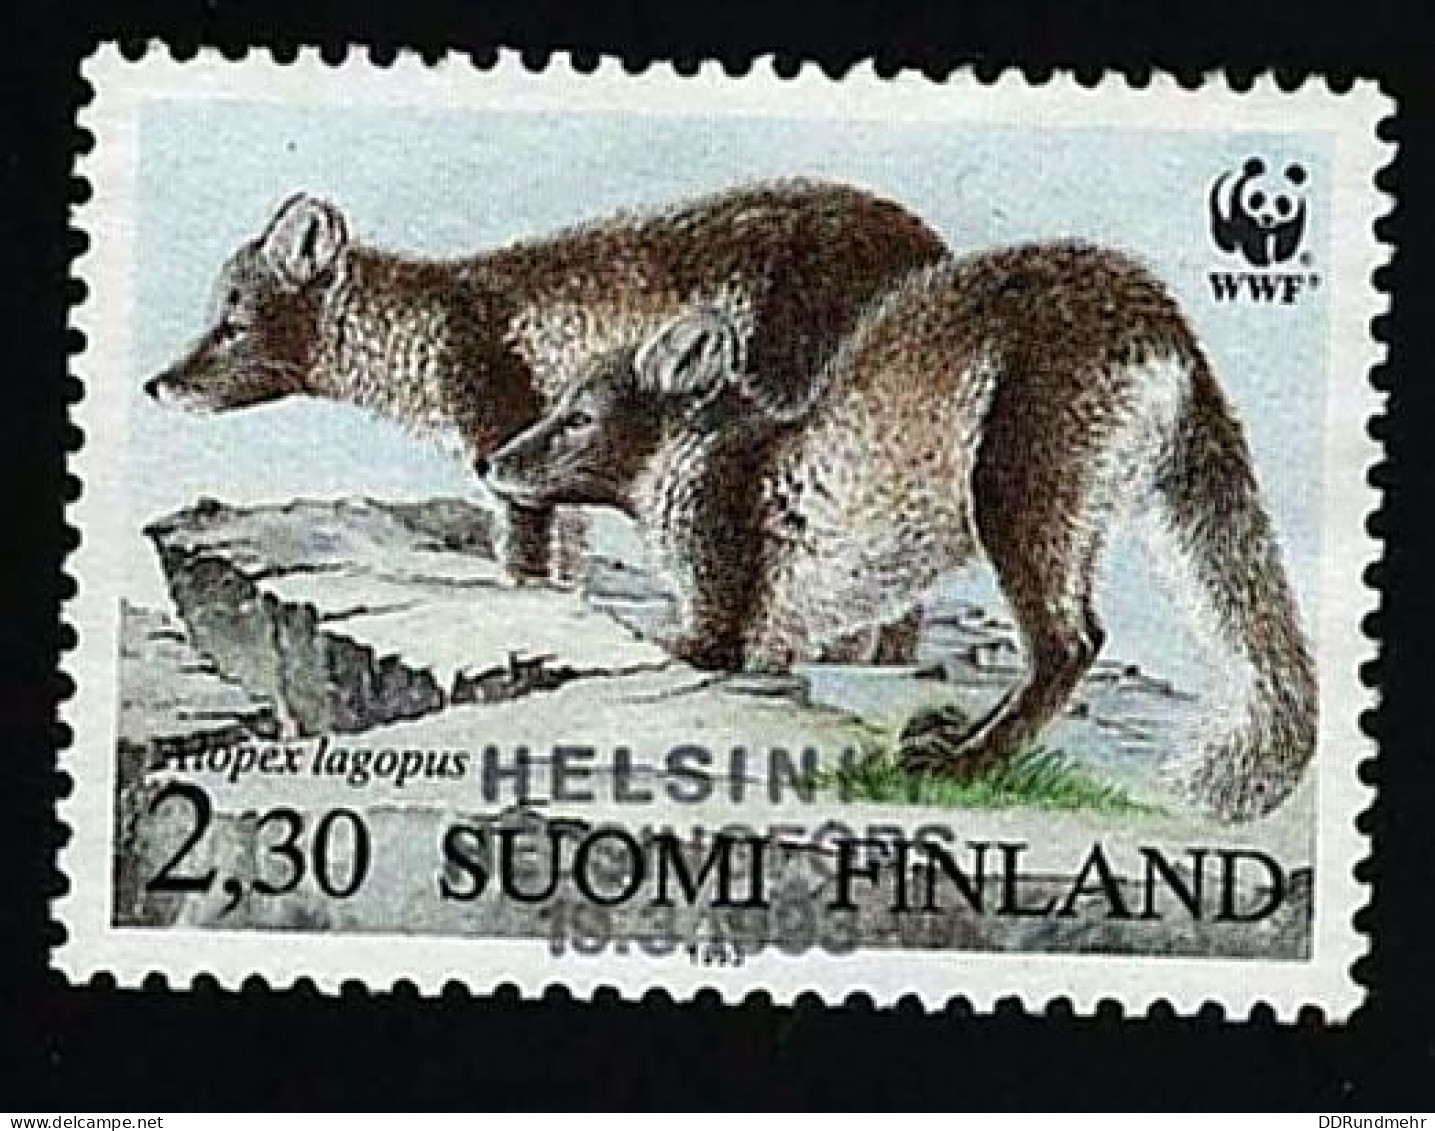 1993 Arctic Fox   Michel FI 1205 Stamp Number FI 907d Yvert Et Tellier FI 1169   First Day Stamp Used - Gebraucht